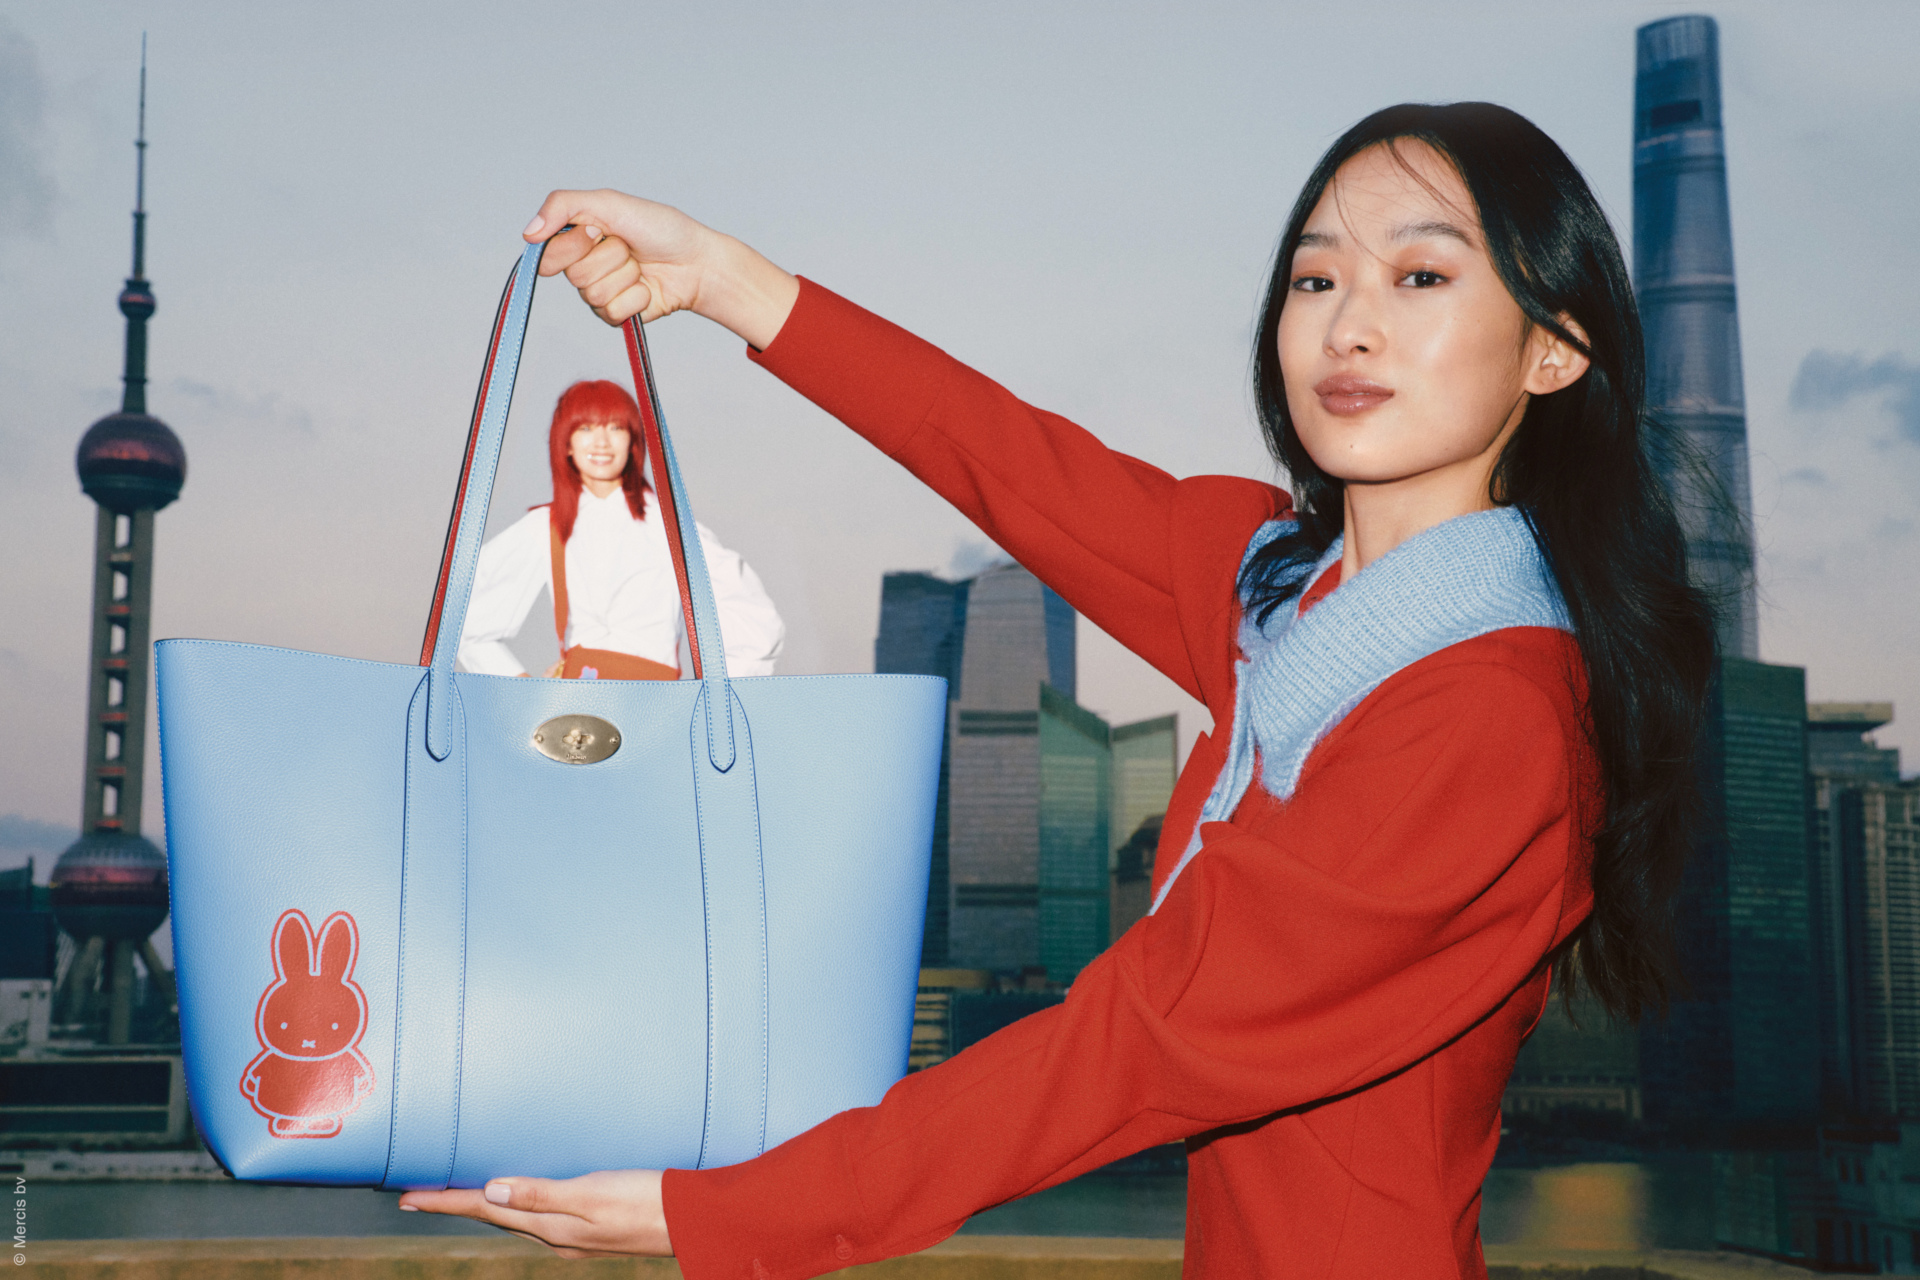 Woman holding up blue bag to show another woman in the background